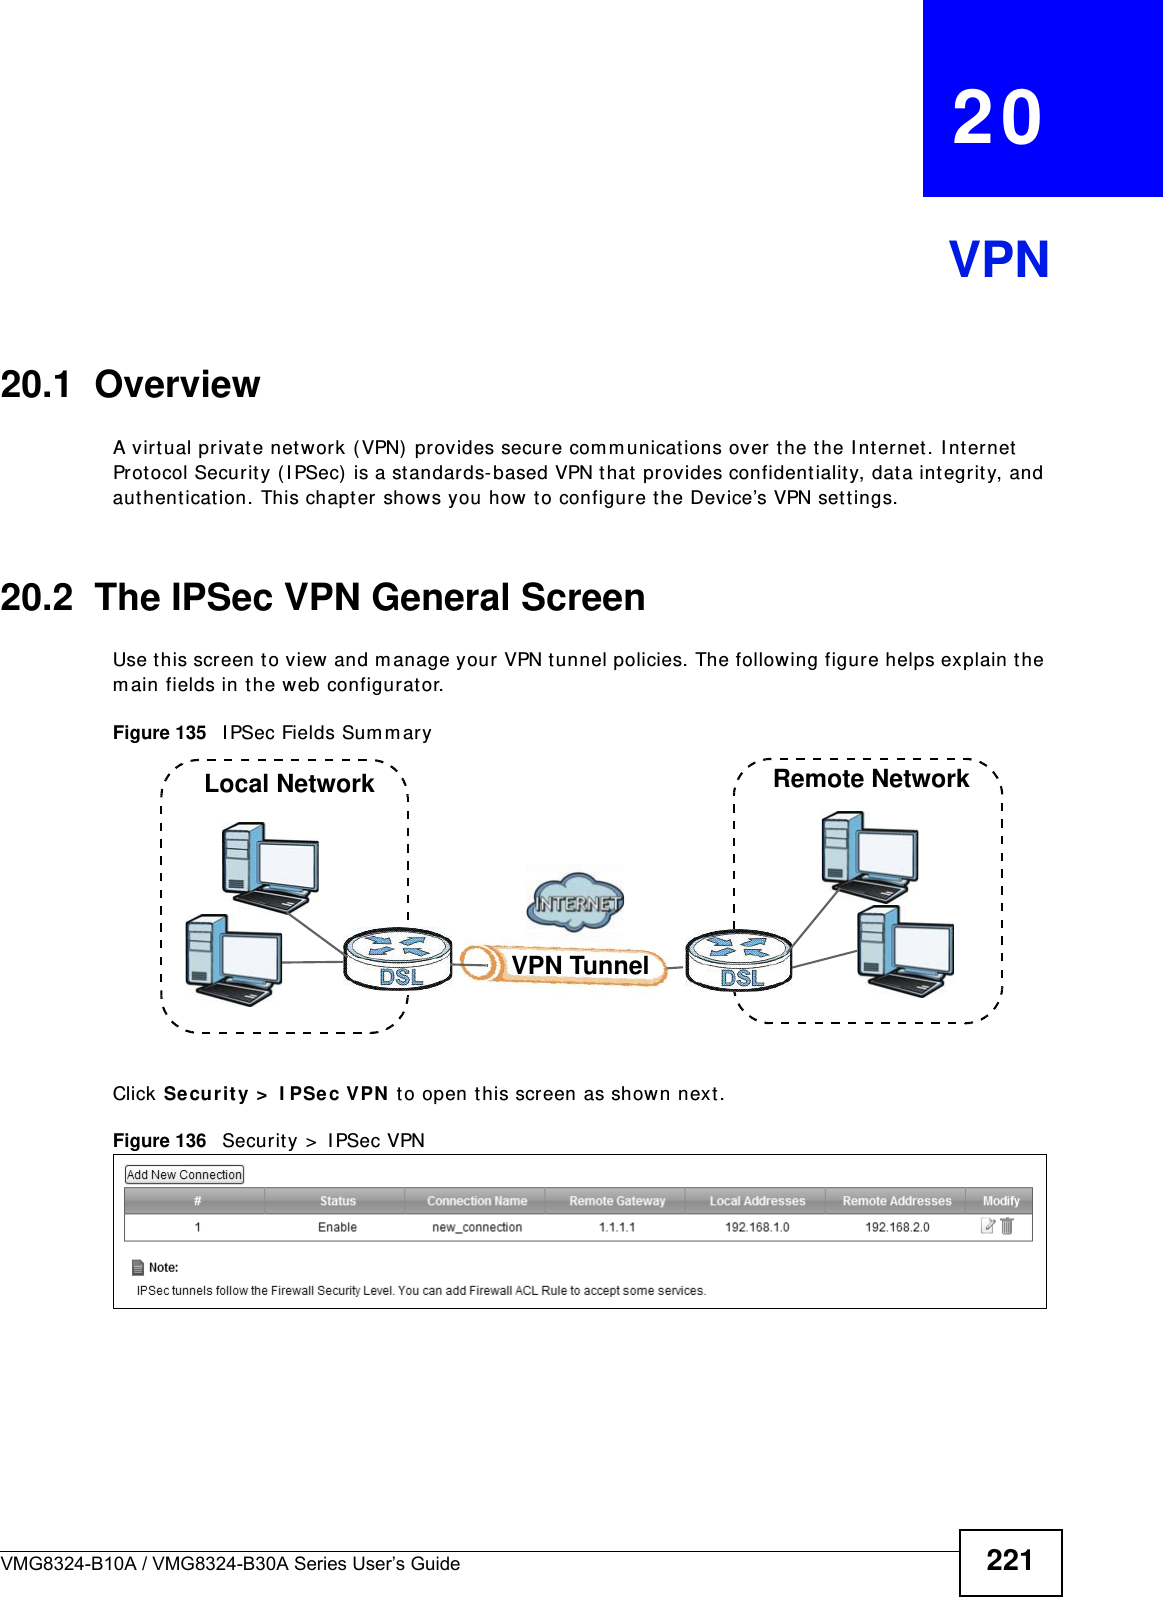 VMG8324-B10A / VMG8324-B30A Series User’s Guide 221CHAPTER   20VPN20.1  OverviewA virt ual privat e network (VPN)  provides secure com m unications over t he the I nt ernet. I nt ernet  Protocol Securit y ( I PSec)  is a st andards- based VPN that  provides confident ialit y, dat a int egrit y, and authent icat ion. This chapter shows you how  t o configure the Device’s VPN sett ings.20.2  The IPSec VPN General ScreenUse t his screen t o view  and m anage your VPN tunnel policies. The following figure helps explain t he m ain fields in the web configurat or. Figure 135   I PSec Fields Sum maryClick Secur it y &gt;  I PSec VPN  t o open this screen as shown next .Figure 136   Securit y &gt;  I PSec VPNLocal Network Remote NetworkVPN Tunnel